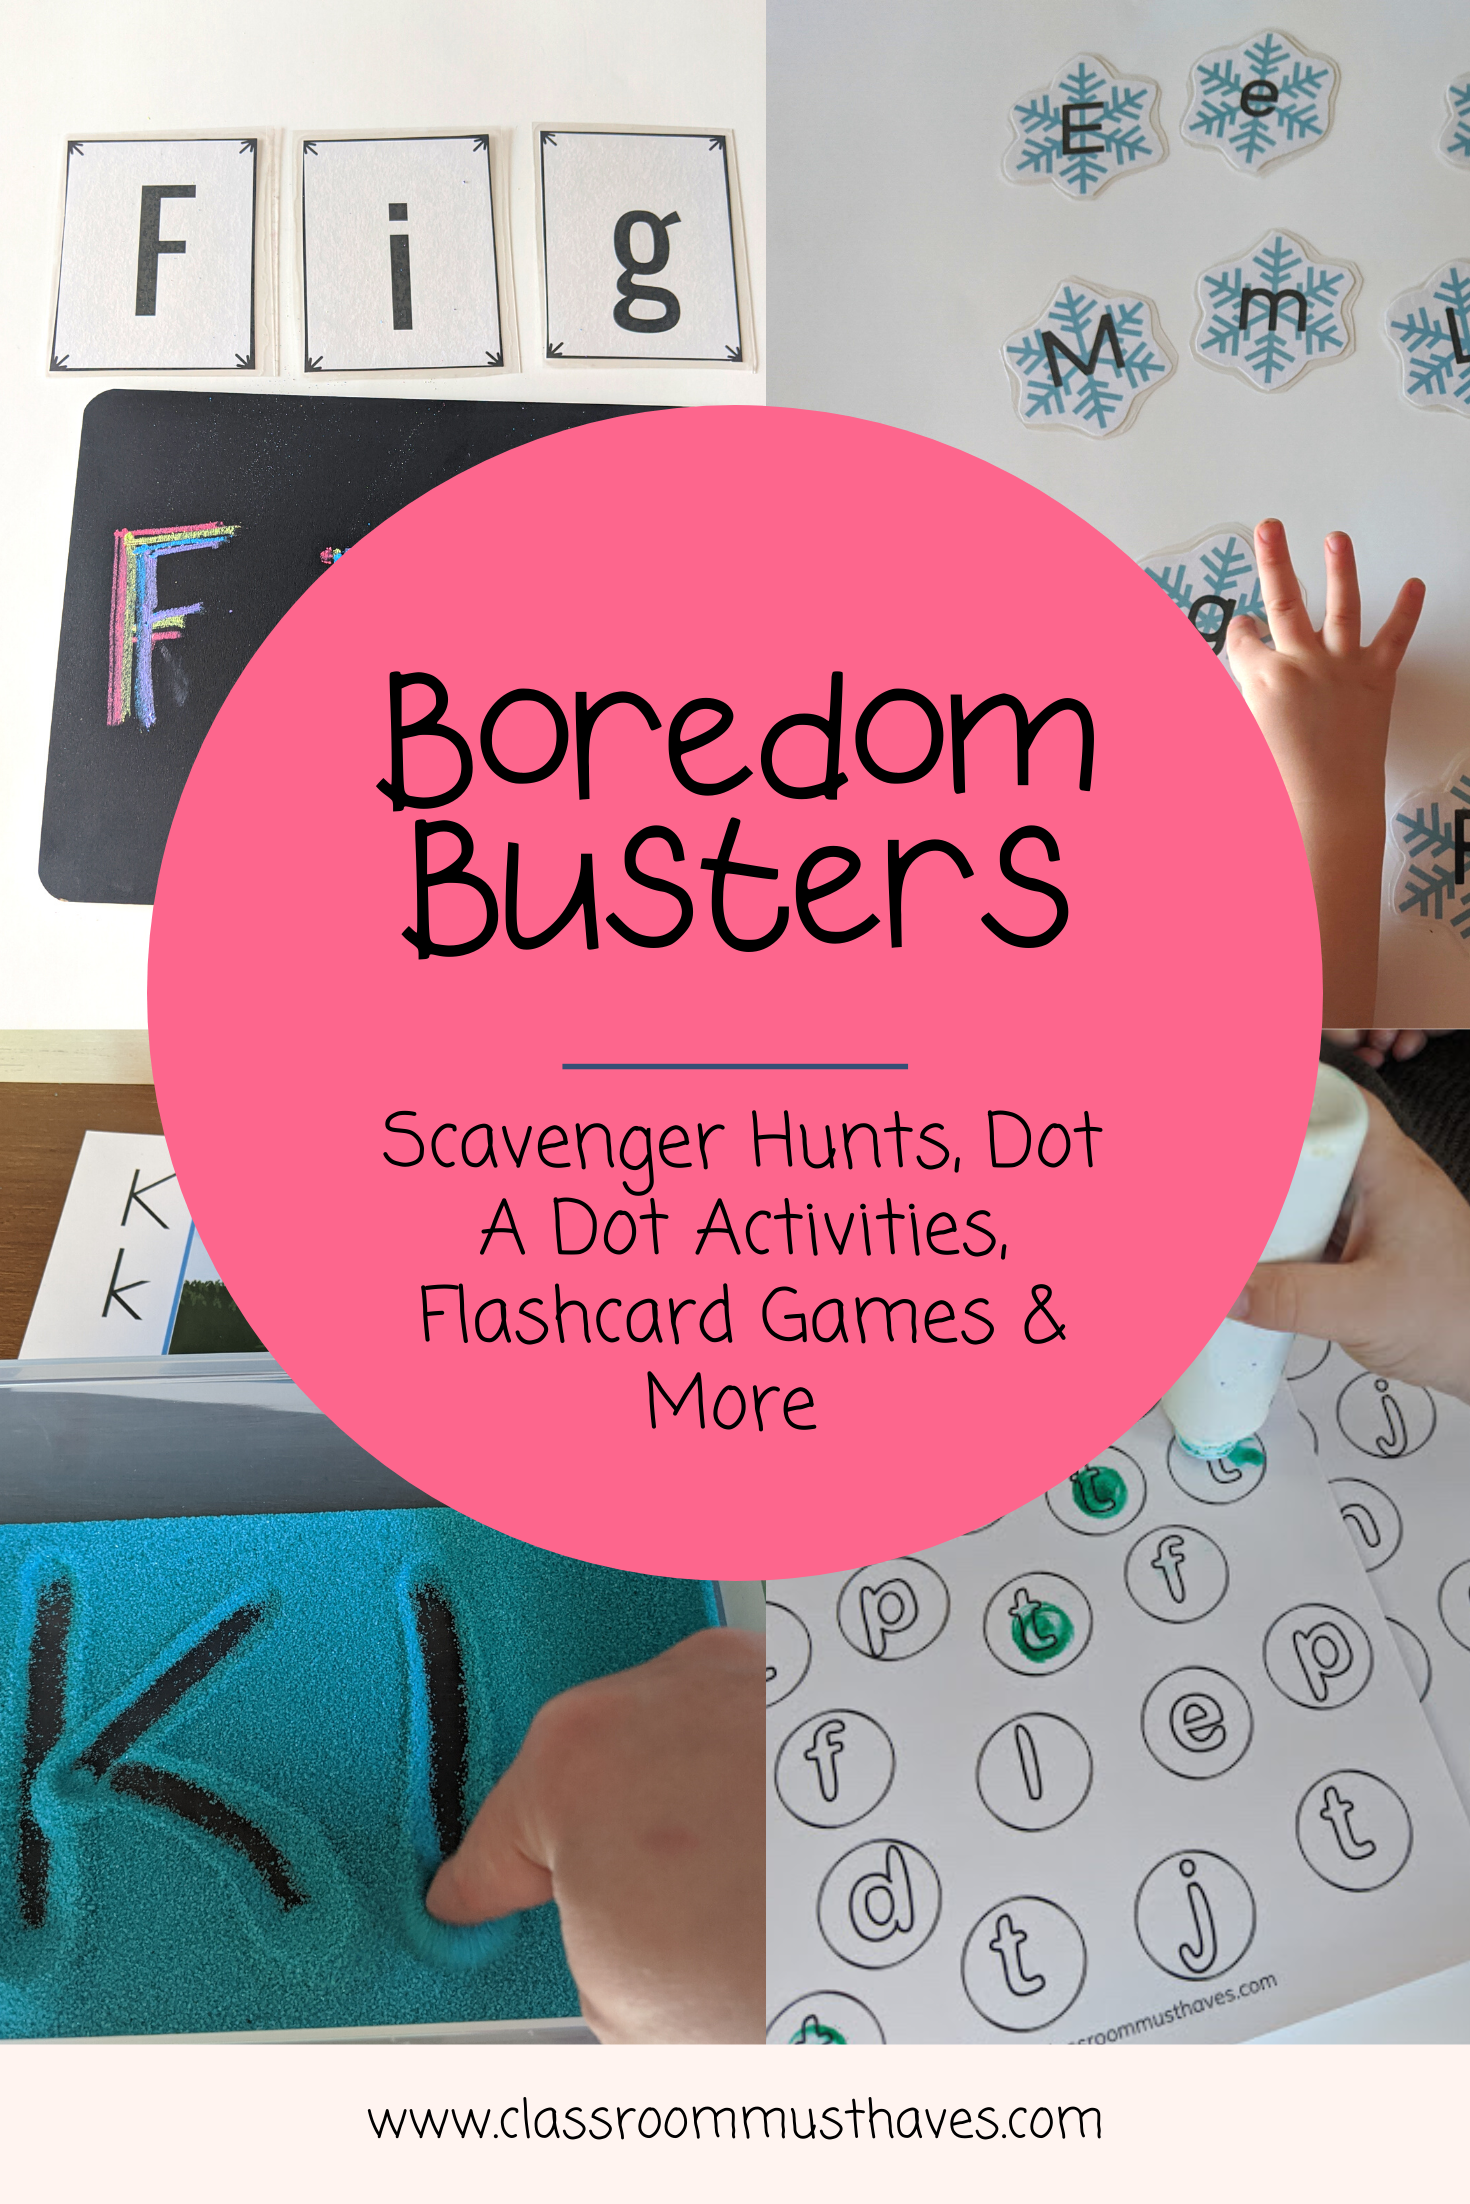 Boredom Busters for Kids. 

FREE Activities and Printables. 

www.classroommusthaves.com via @classroommusthaves